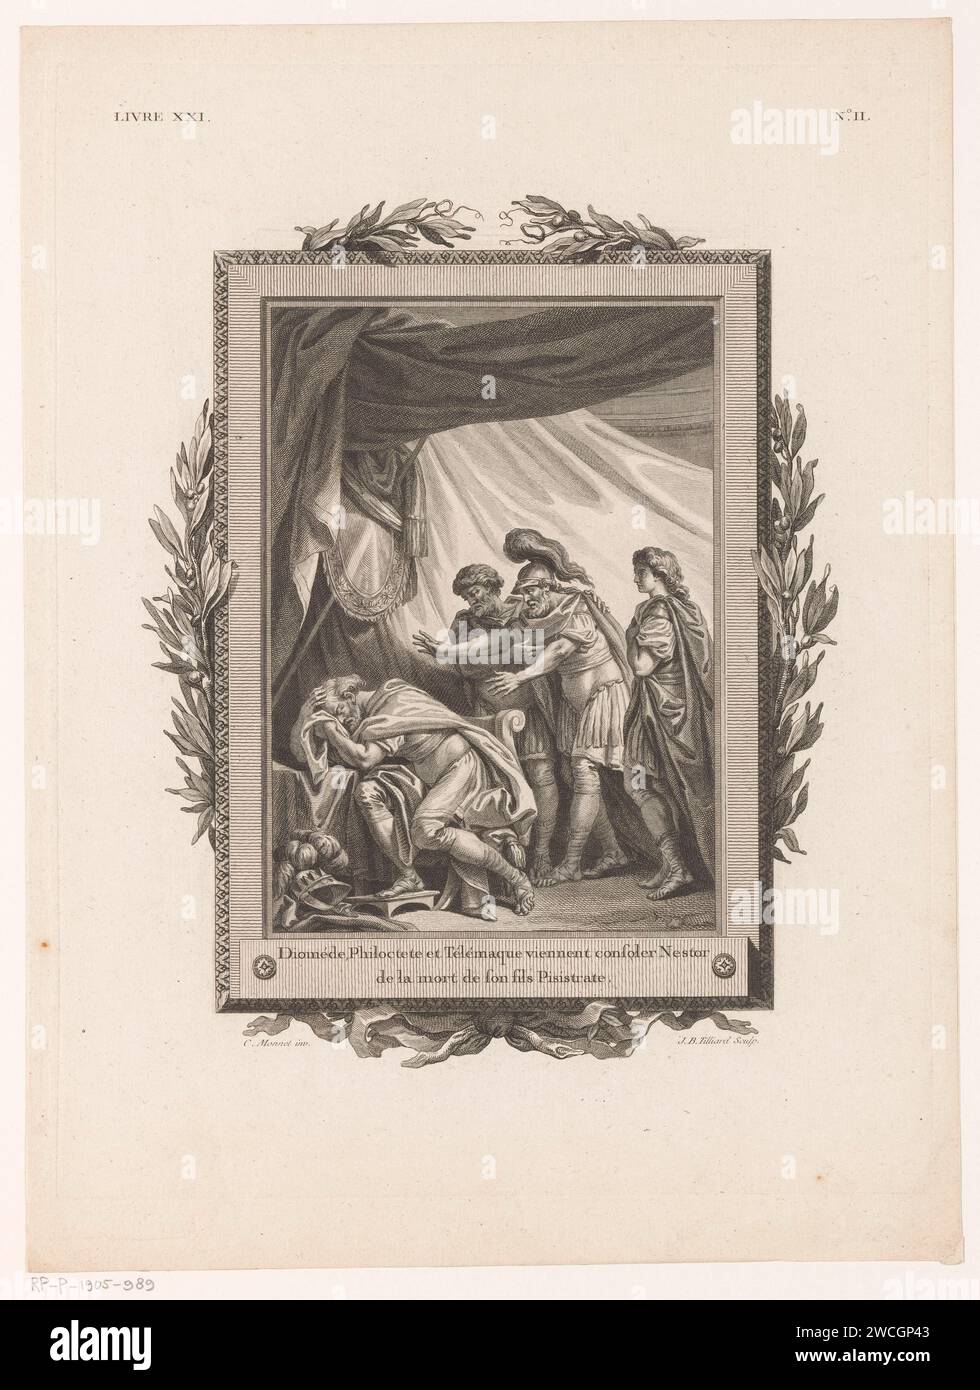 Telemachus, Philoktetes and Diomedes comfort Nestor after the loss of his son, Jean-Baptiste Tilliard, After Charles Monnet, 1785 print Nestor, seated at the table in a tent with his head in his hands, is visited by Telemachus, Philoktetes and Diomedes who walk into the tent behind him. The whole is framed by a decorative frame with olive branches and a bow at the bottom. Numbered at the top right: No. Ii. print maker: Franceafter drawing by: Francepublisher: Parispublisher: Parispublisher: Parispublisher: Parispublisher: Paris paper etching / engraving (FENELON, Telemachus) specific works of Stock Photo